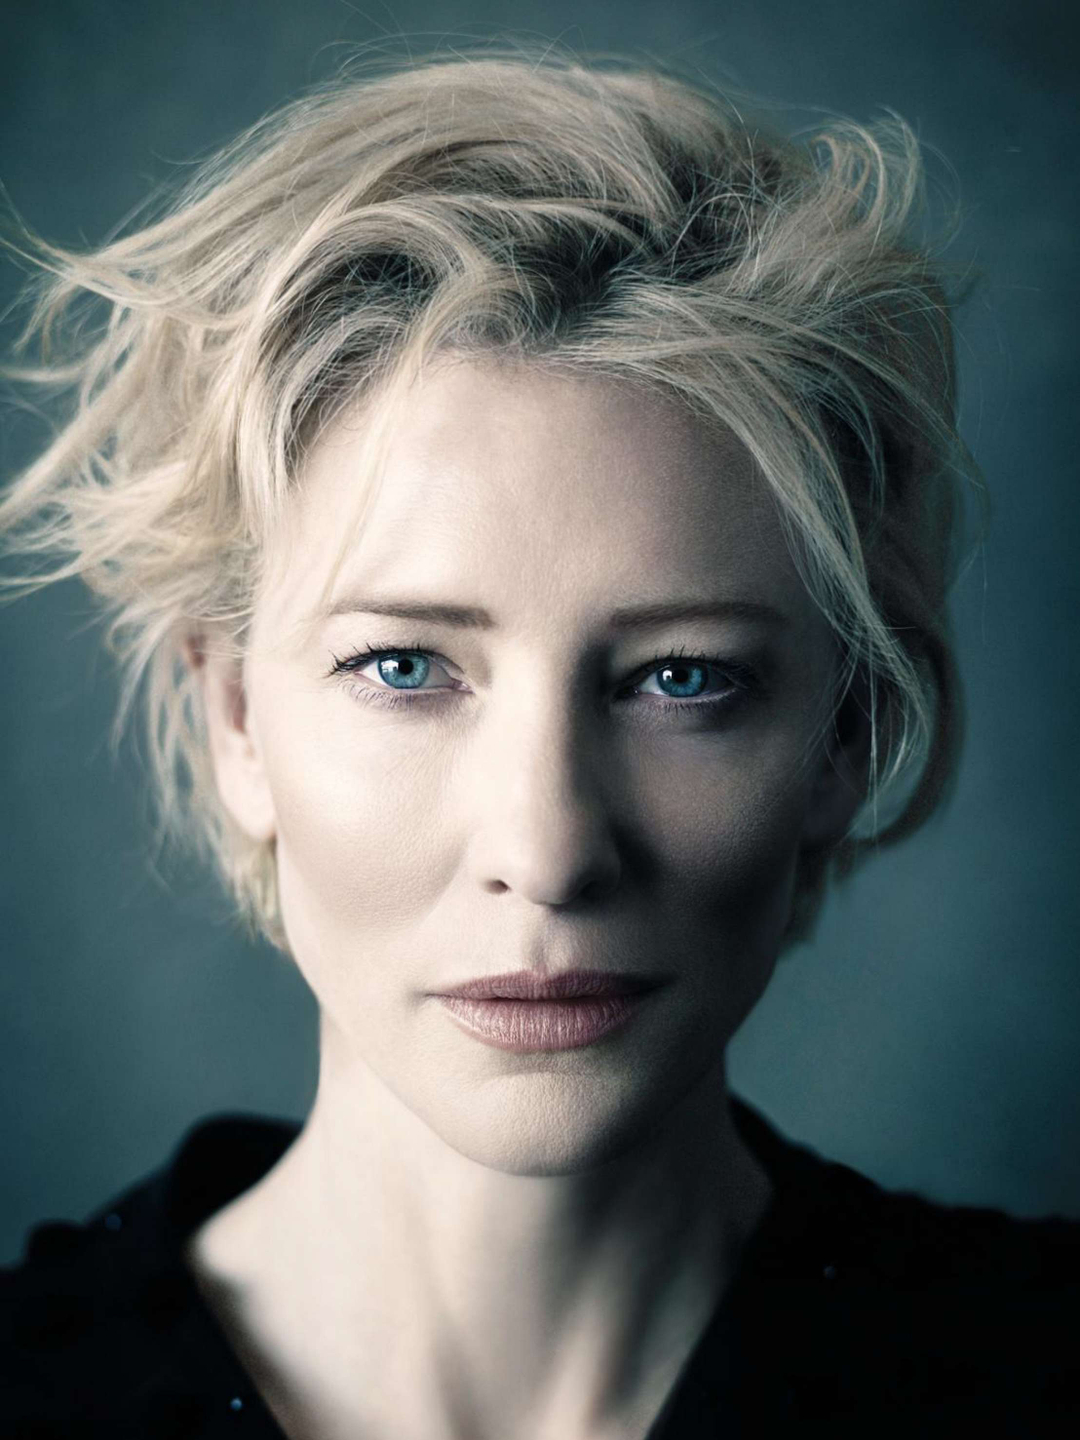 Cate Blanchett who is her father